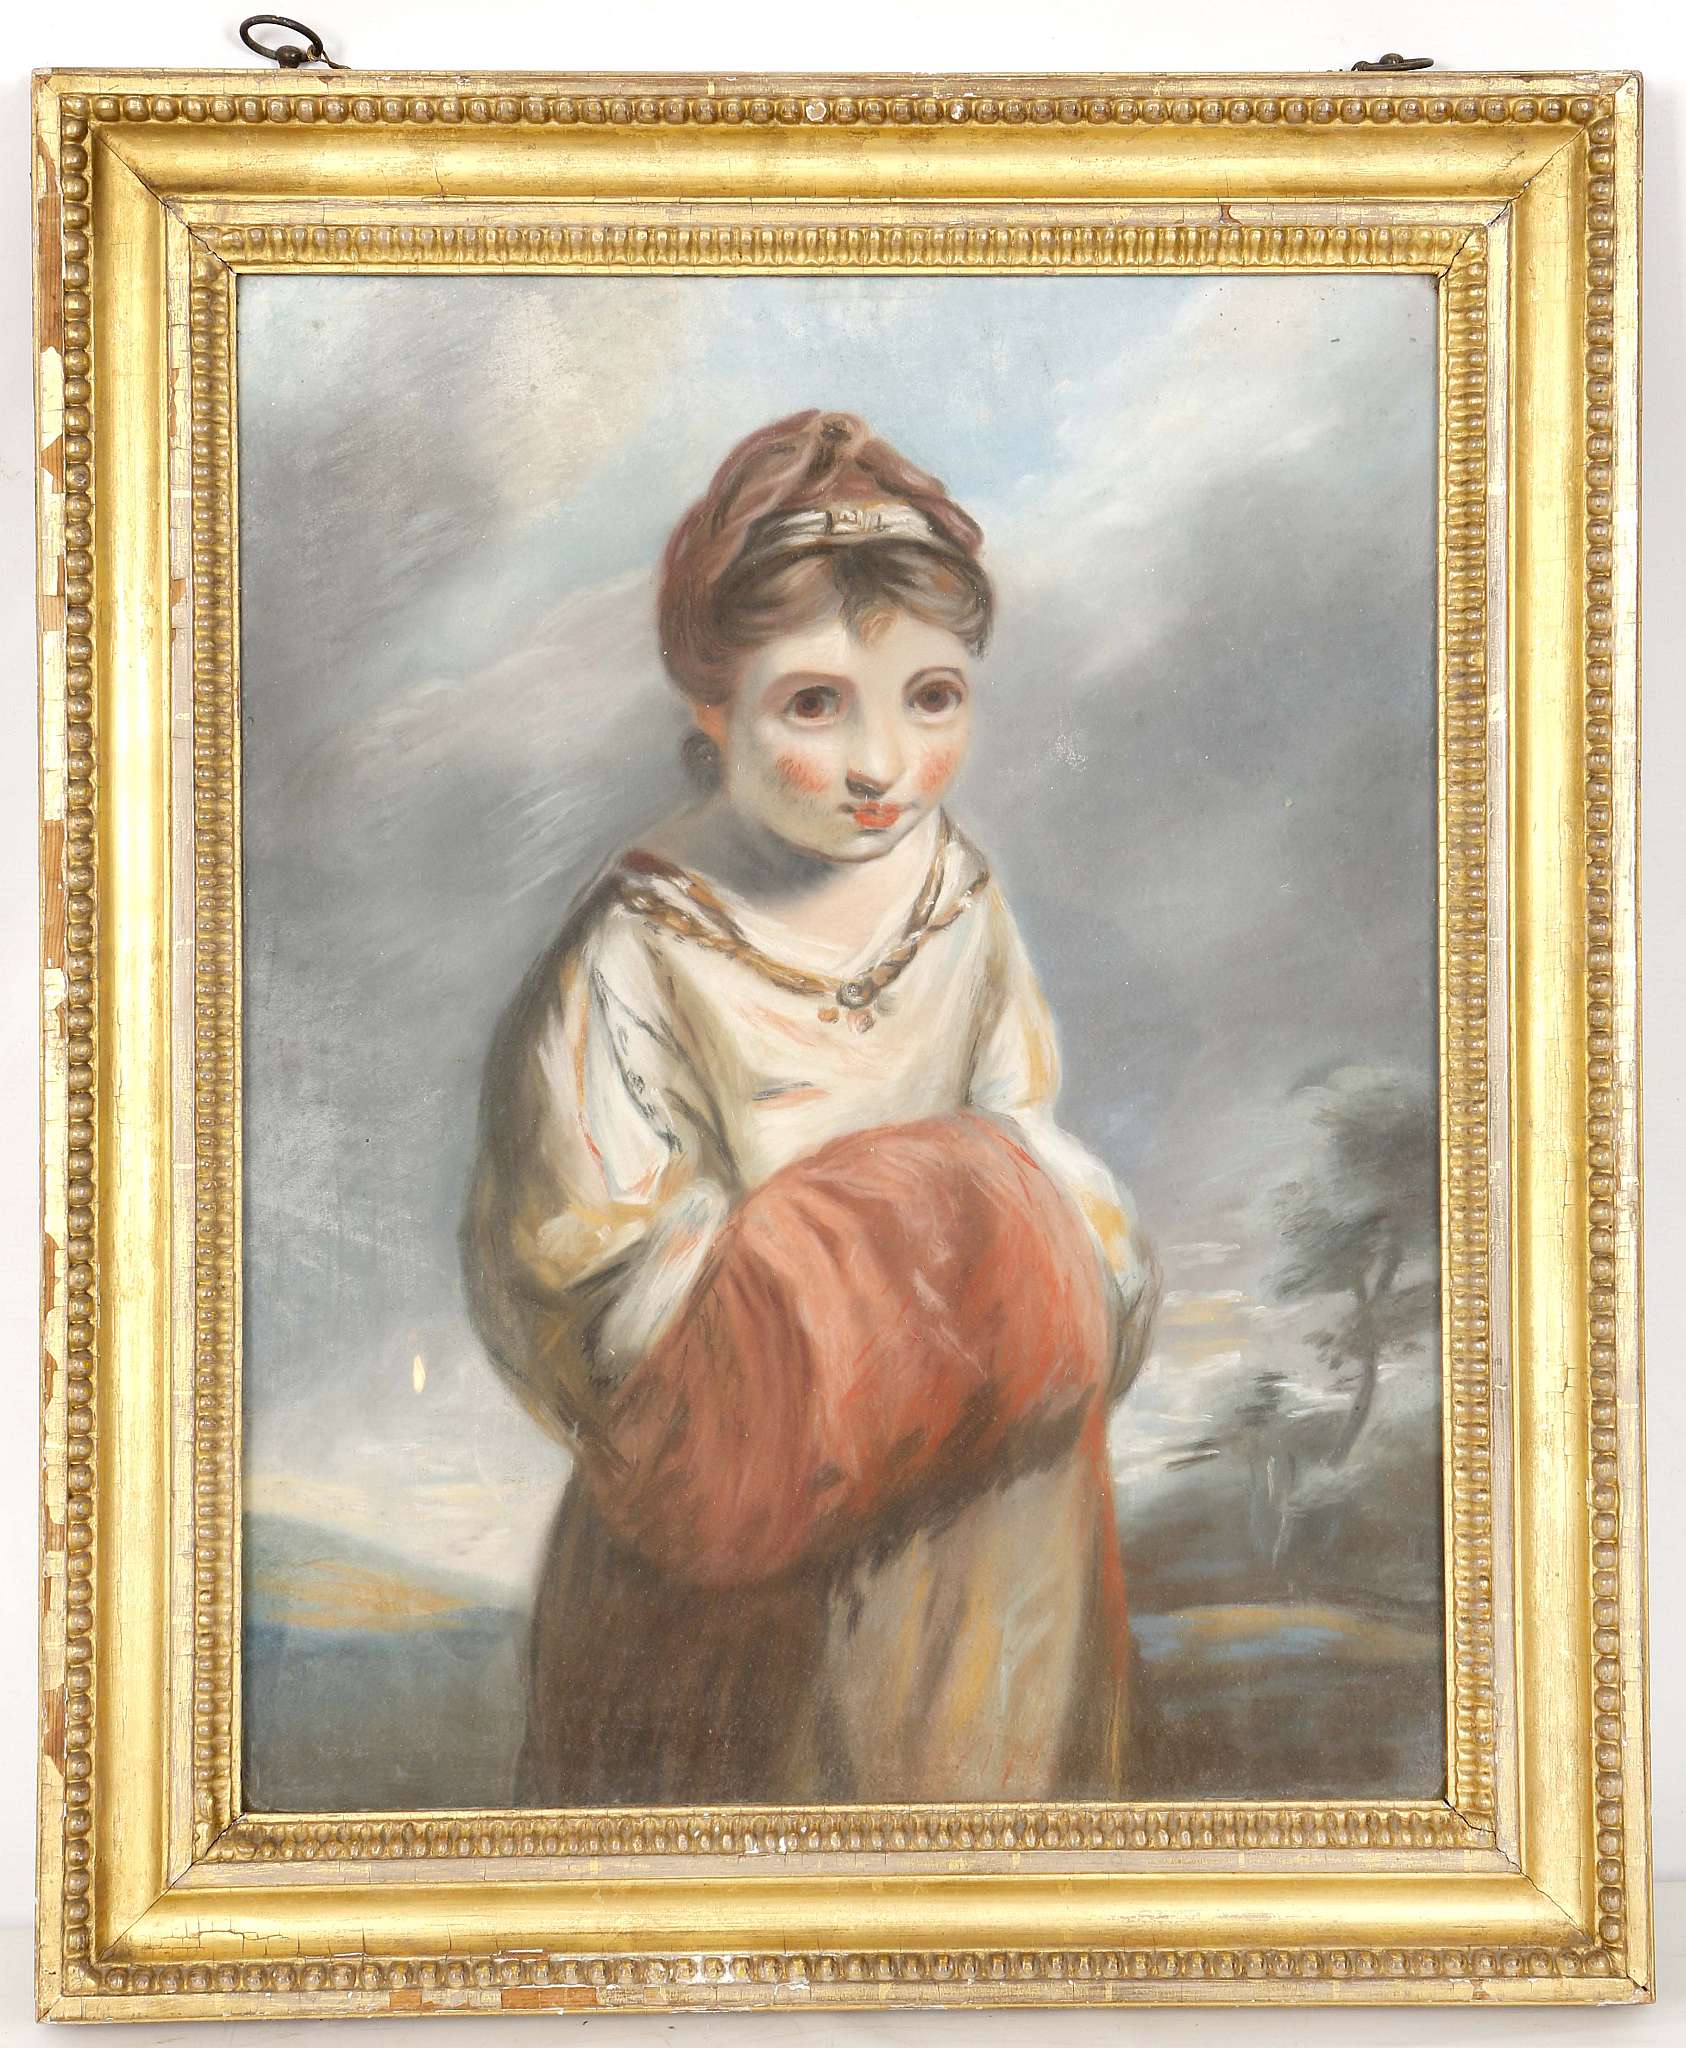 After Sir Joshua Reynolds, P.R.A. 1723-1792, 'A Strawberry Girl', pastel, late 18th Century, mounted